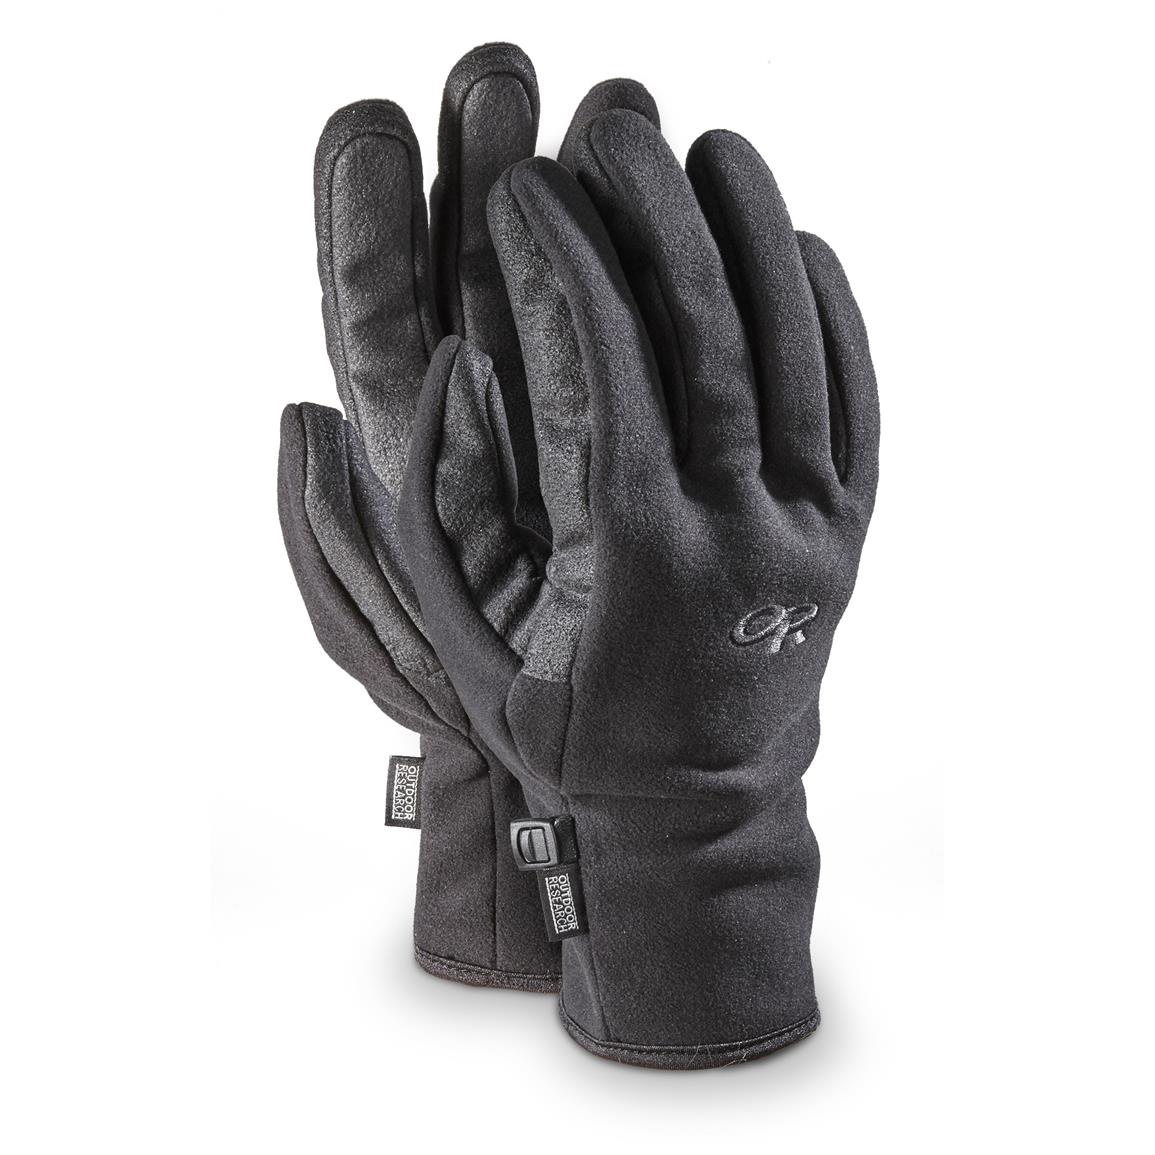 Outdoor Research Gripper Gloves, Black - 637281, Gloves & Mittens at Sportsman's Guide